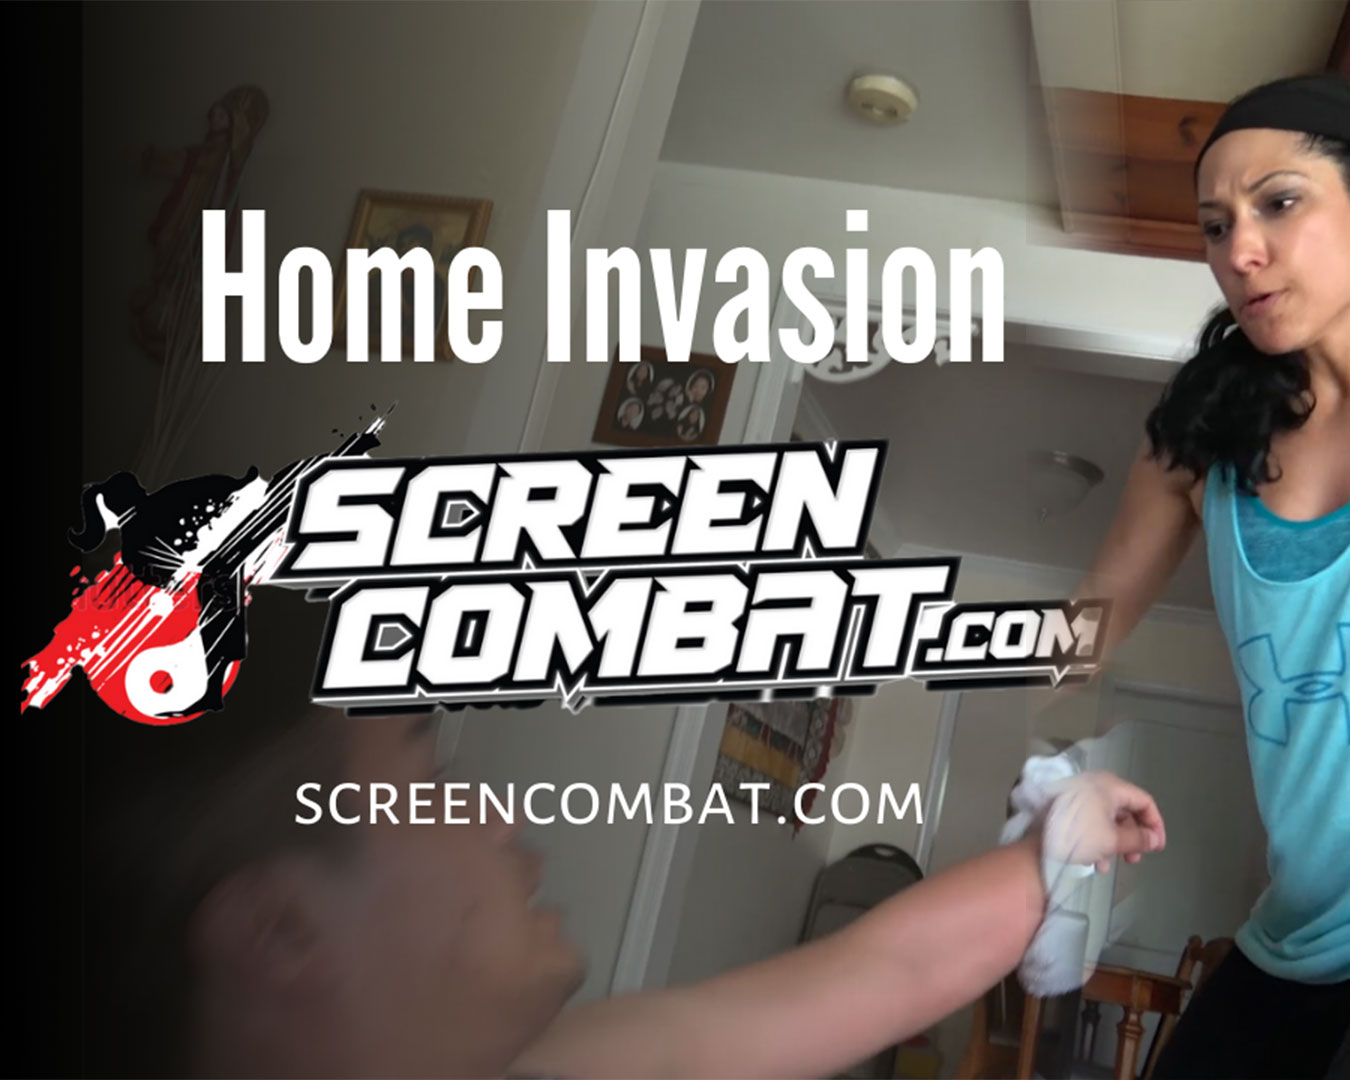 <b>TOP TITLE:</b><br/>Home Invasion